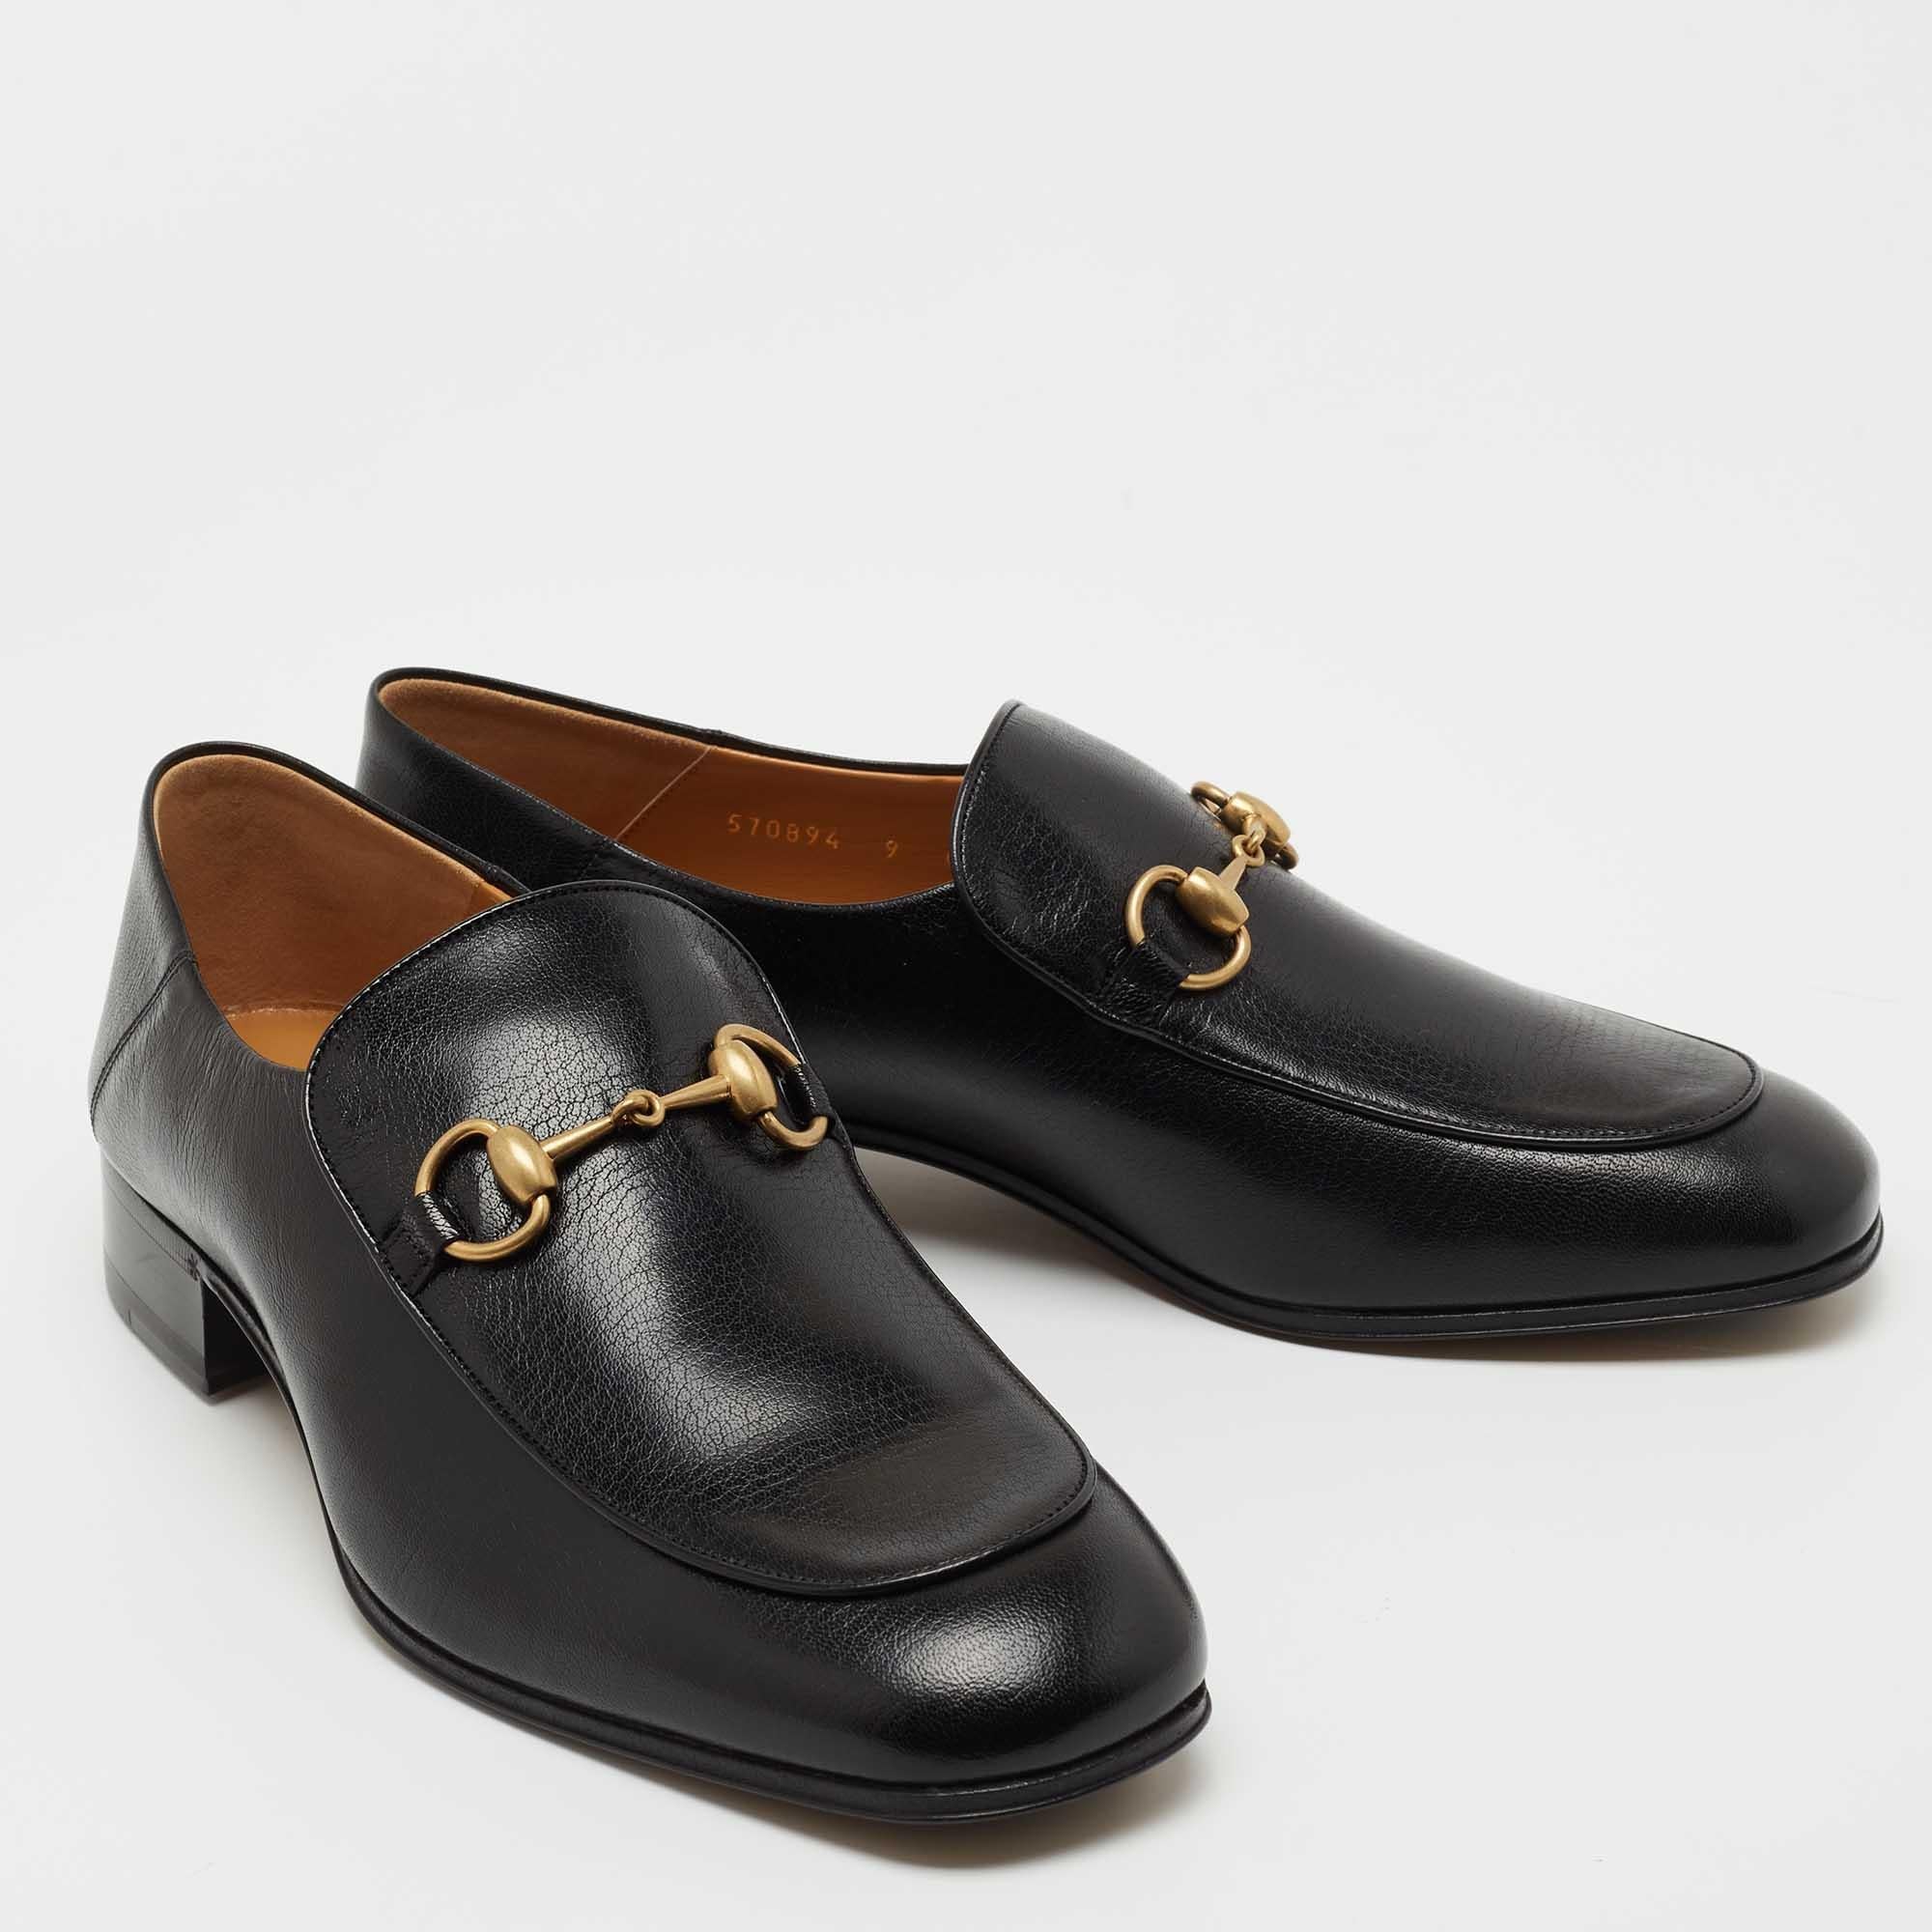 Exquisite and well-crafted, these Gucci loafers are worth owning. They have been crafted from leather and they come flaunting a black shade with Horsebit detailing on the uppers. The loafers are ideal for wearing all day.

Includes
Original Dustbag,